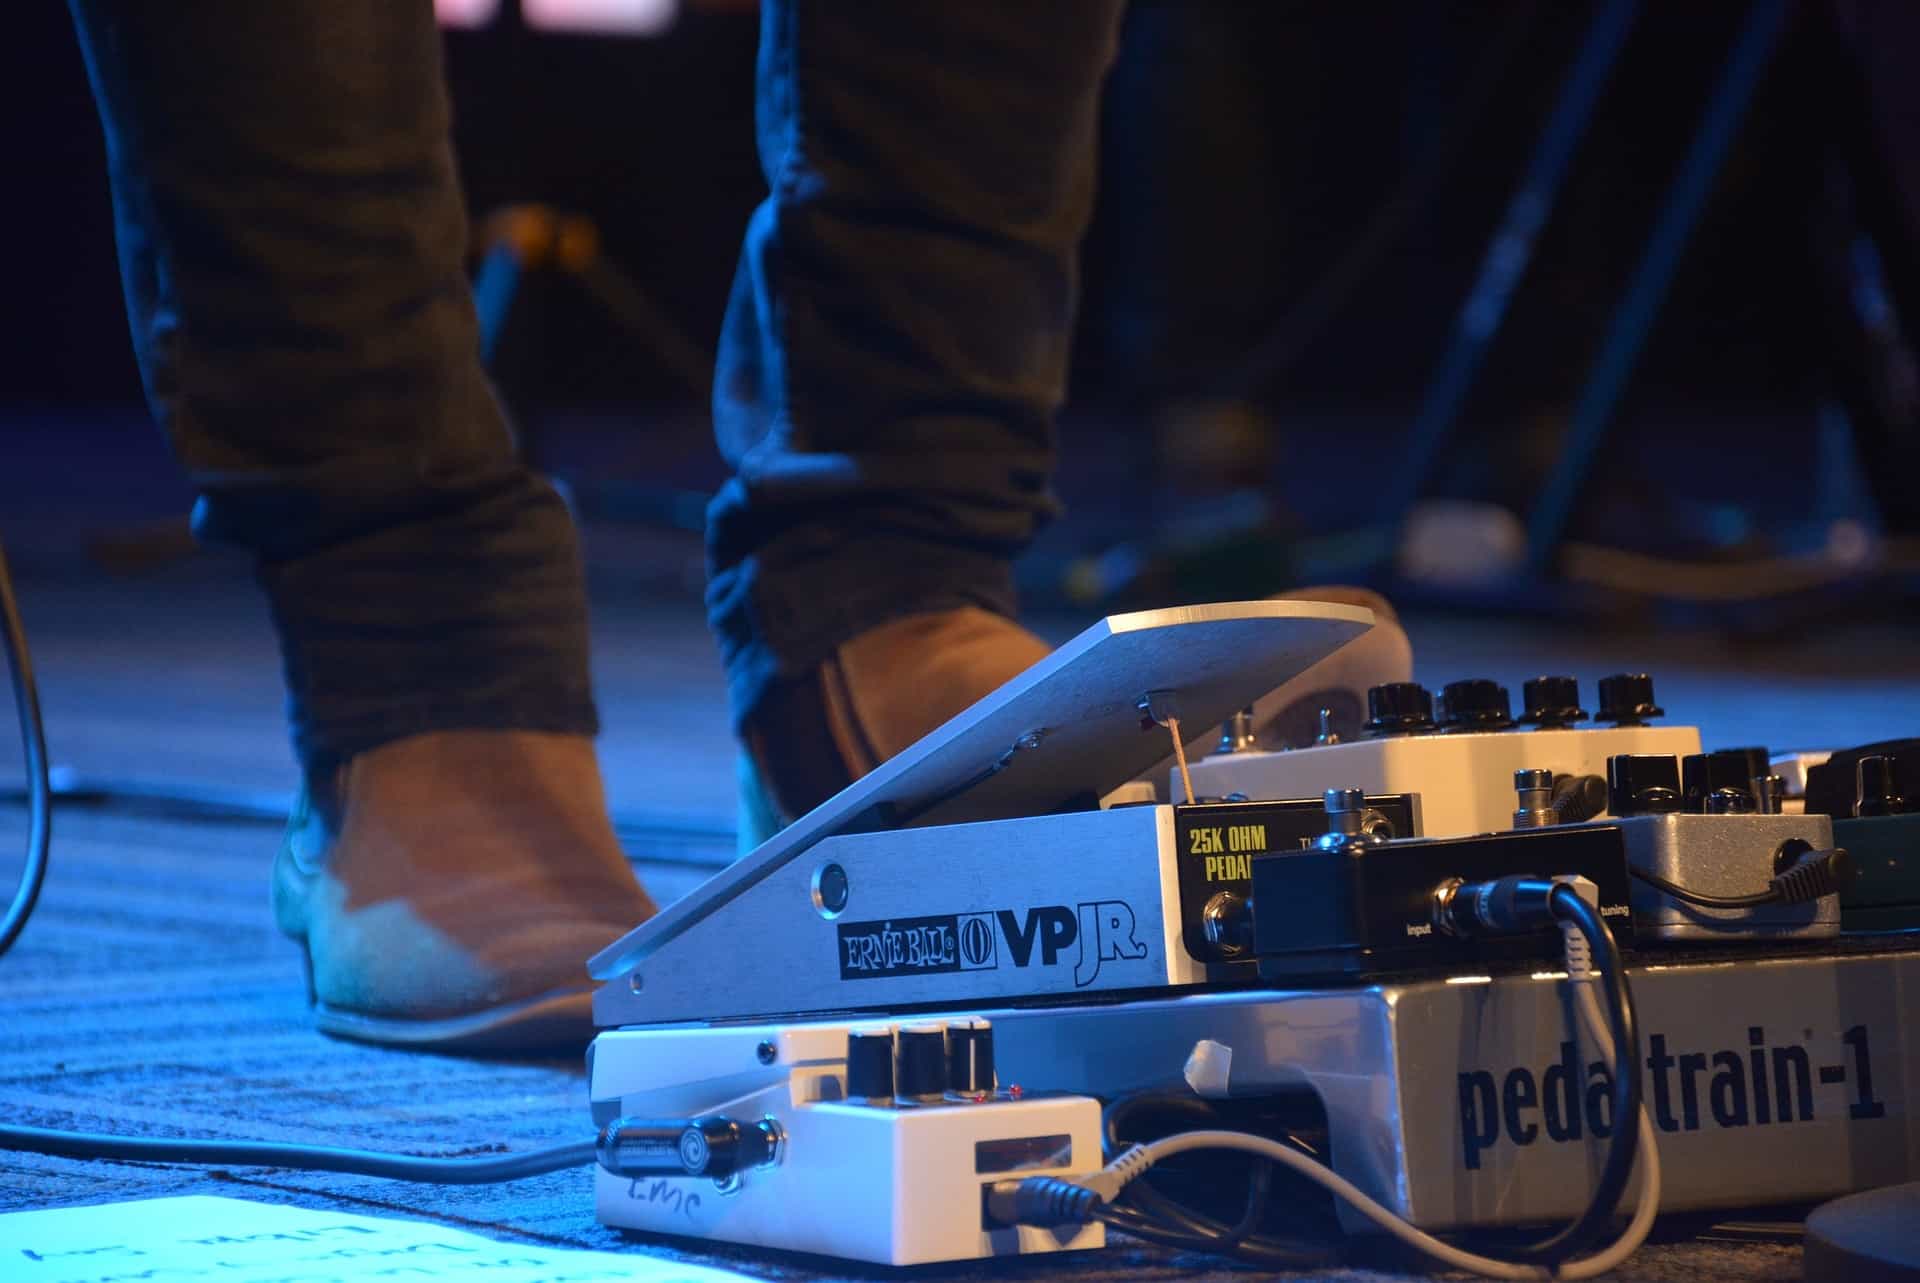 10 Best Wah Effect Pedals in 2022 [Buying Guide] - Music Critic